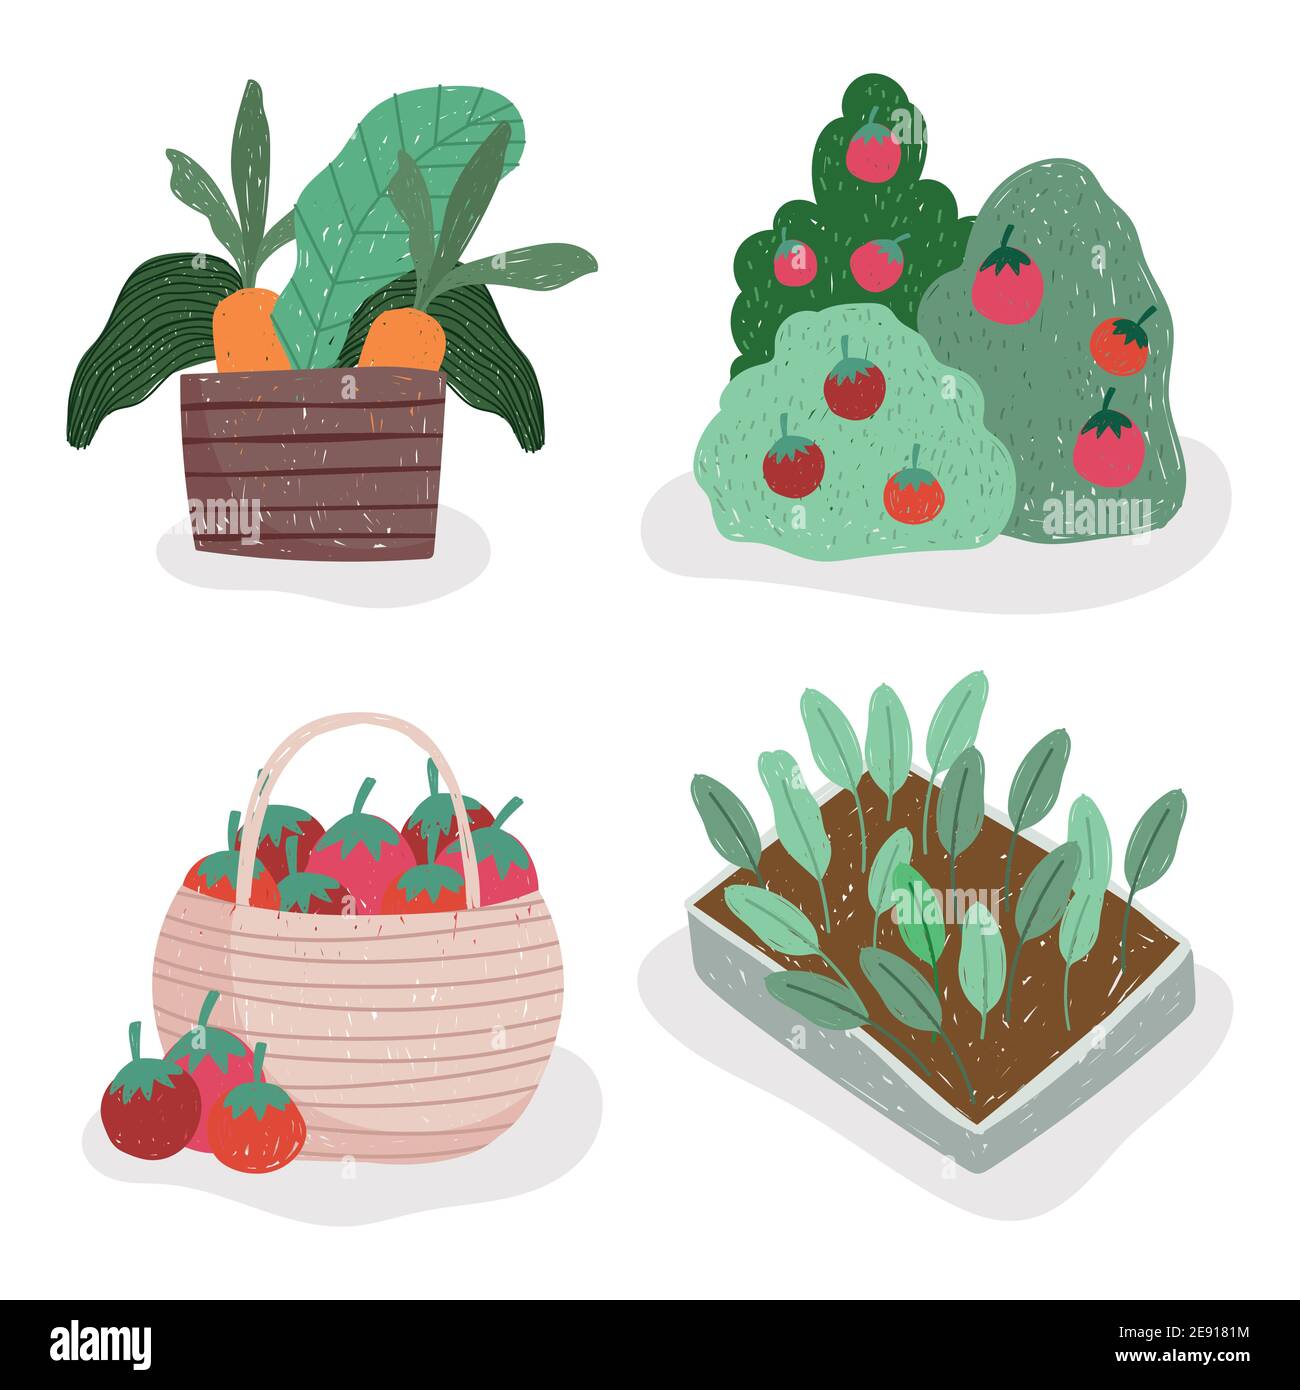 gardening and agriculture tomatoes carrots and plants vector illustration Stock Vector